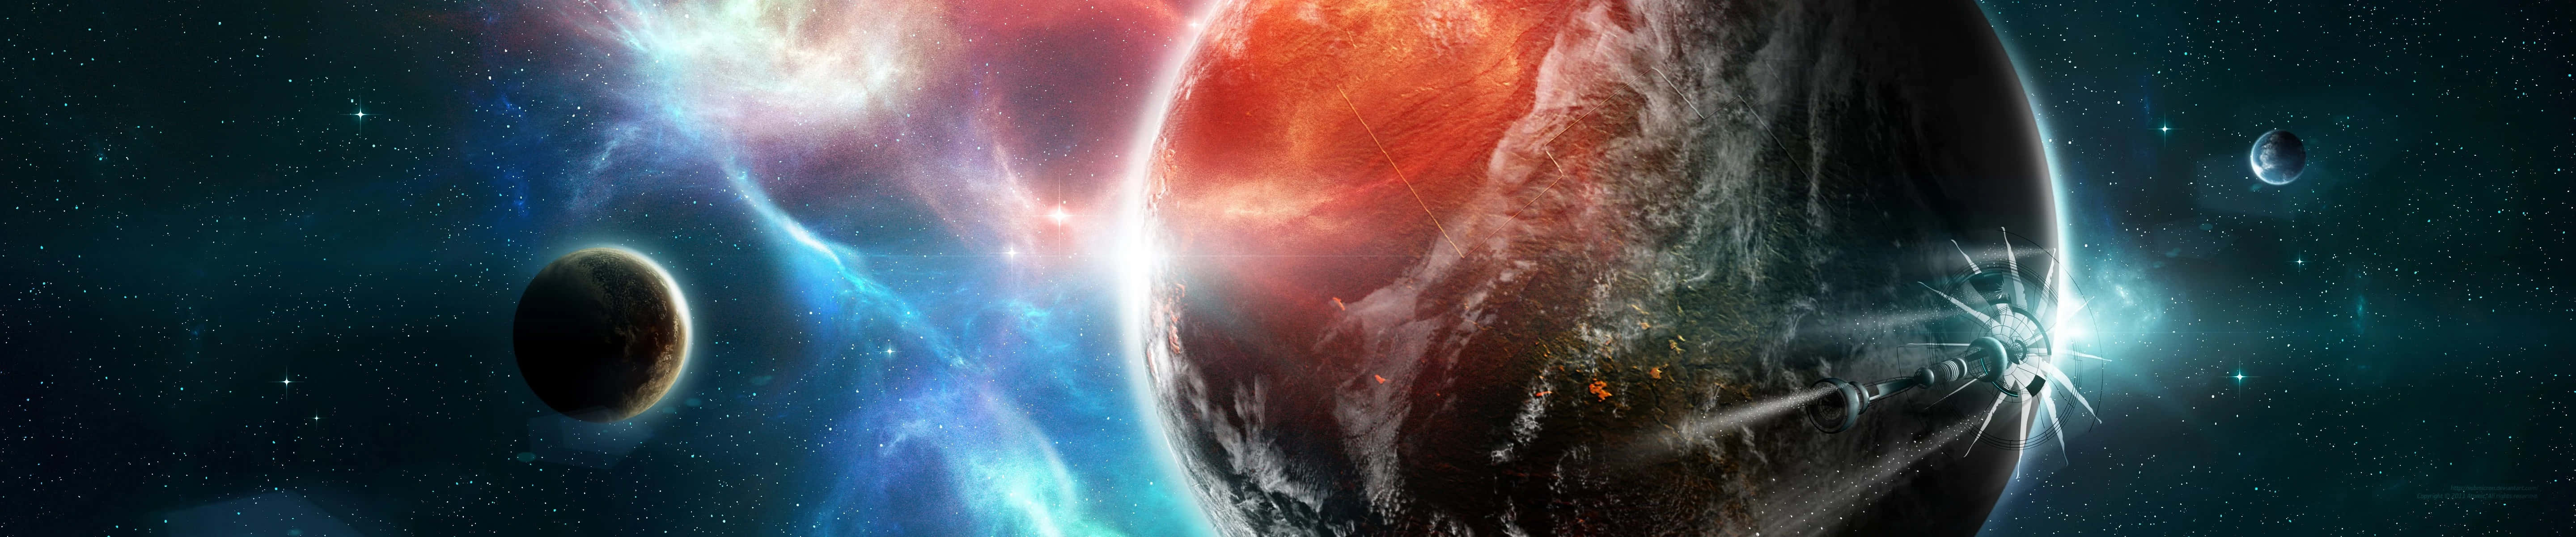 Red And Blue Dual Screen Space With Planets Wallpaper